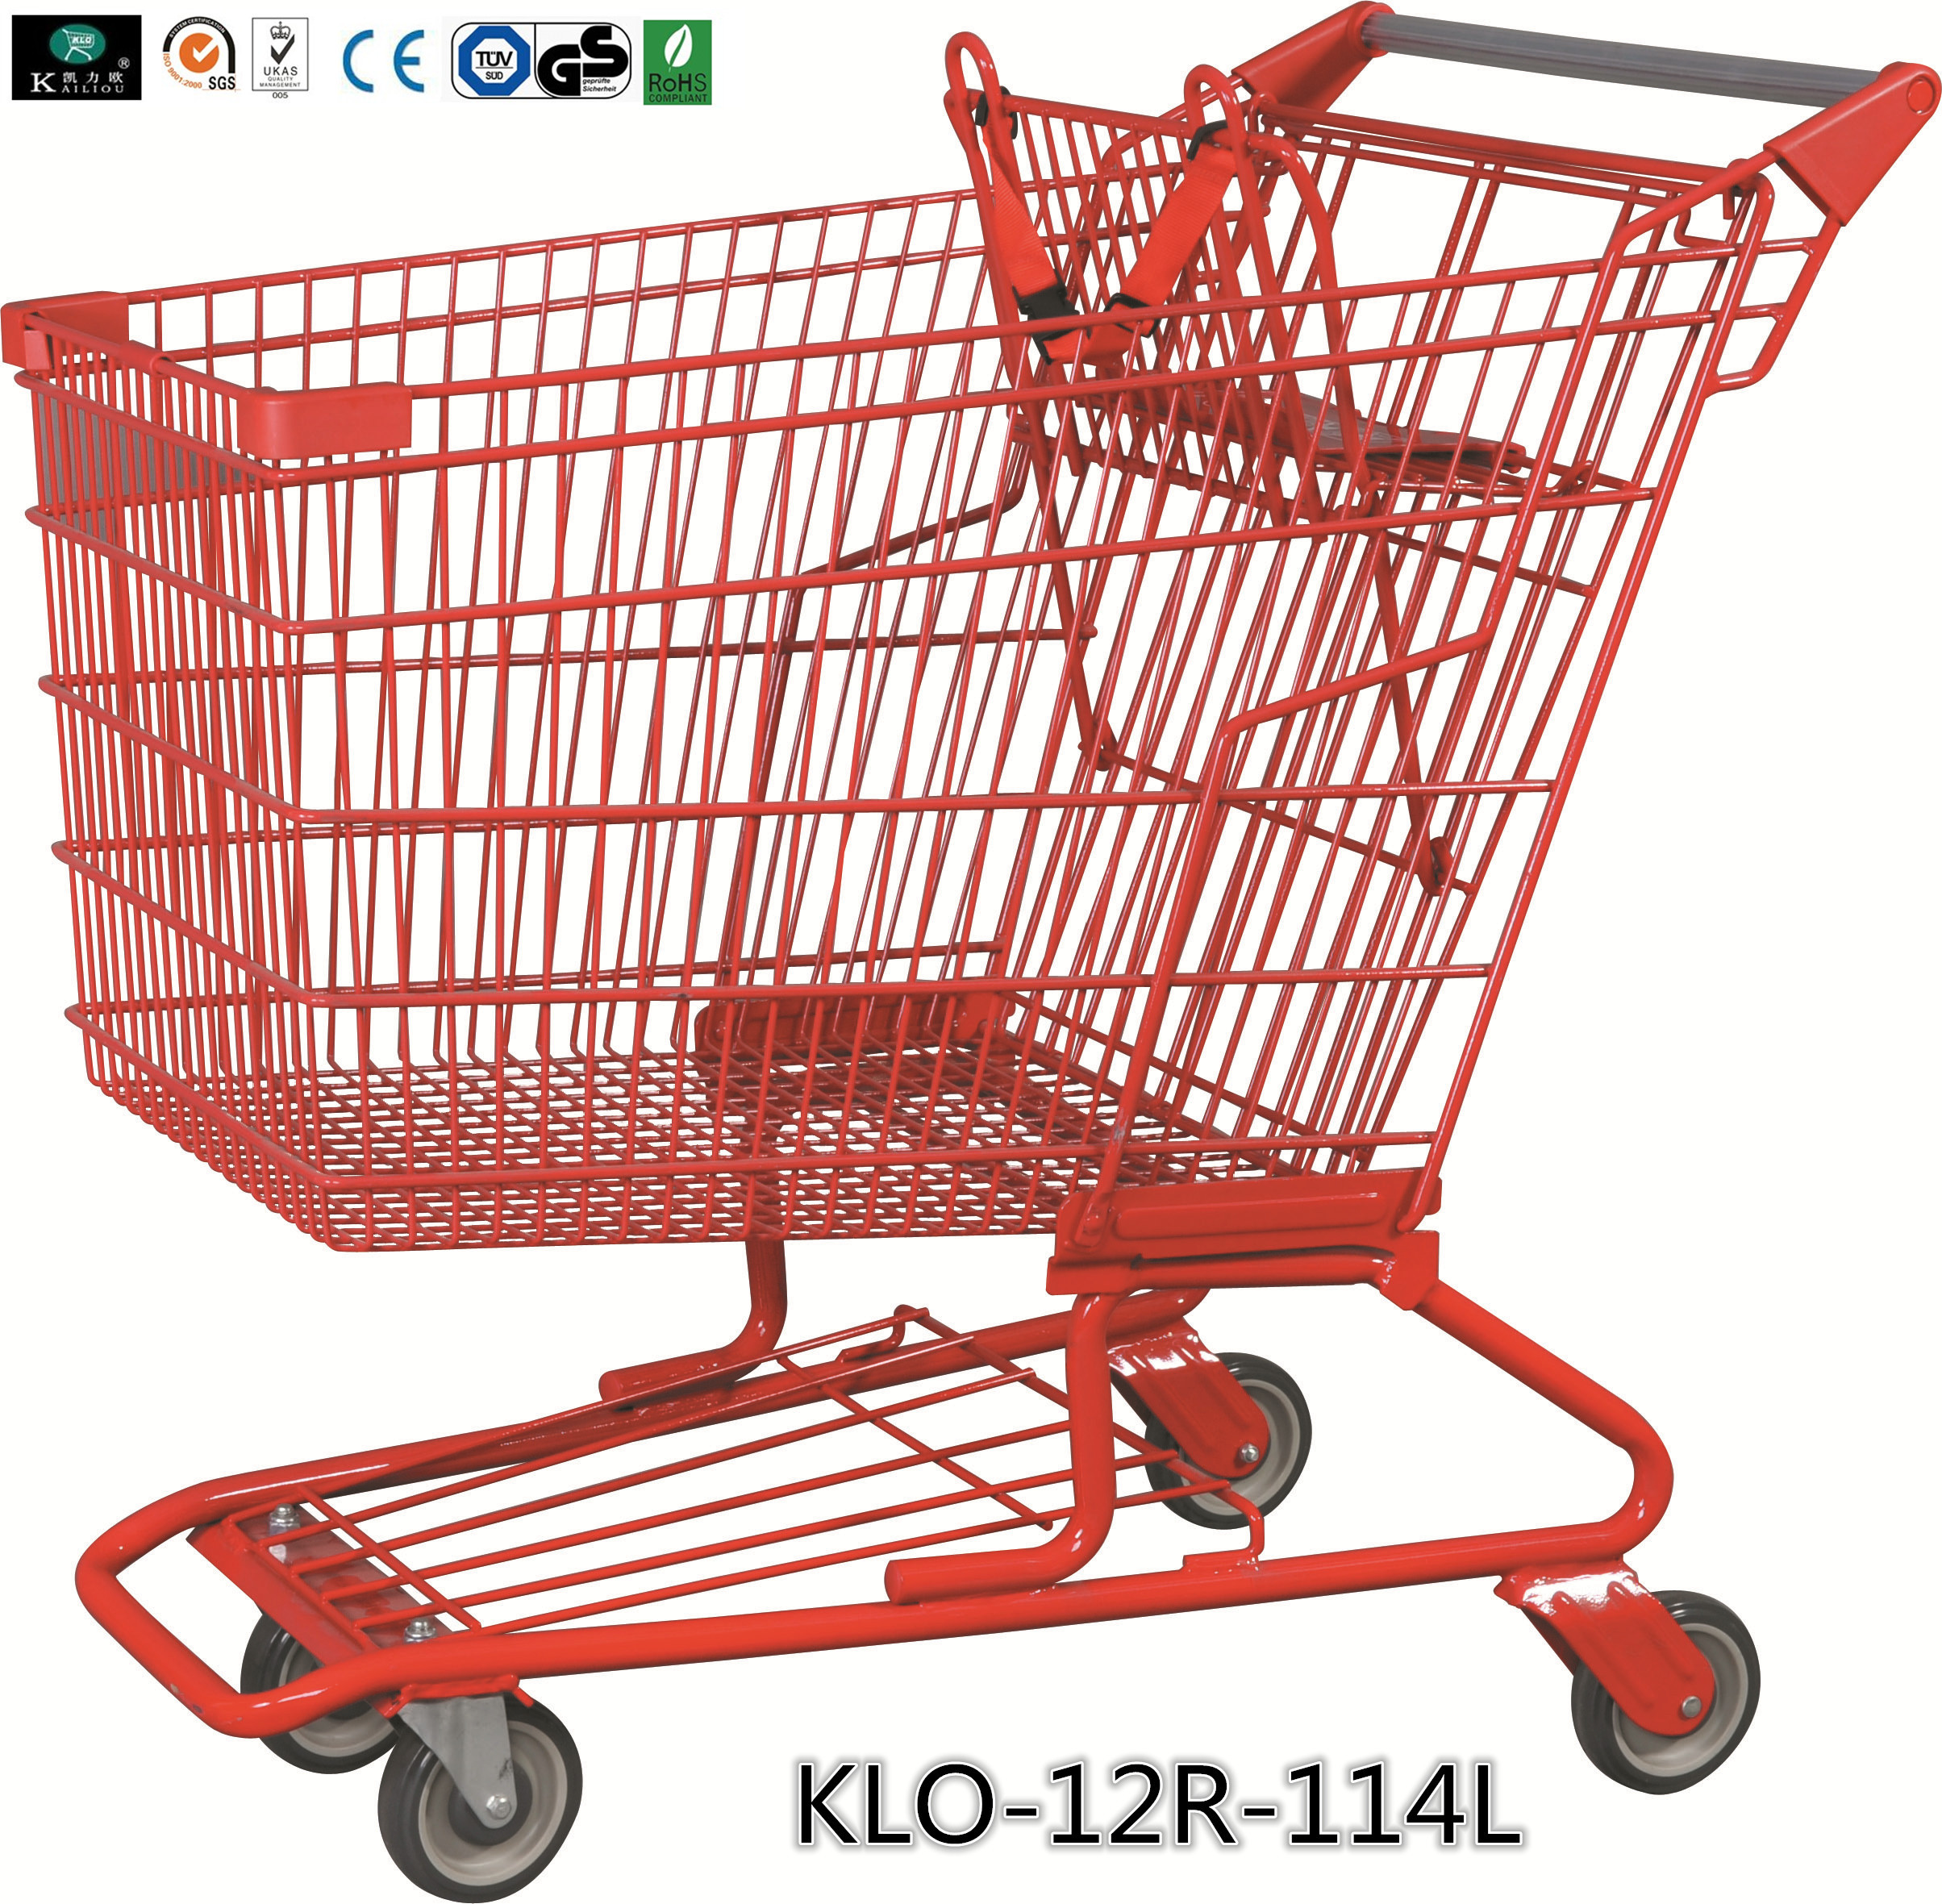 Red Powder Coating Small Metal Shopping Carts For Seniors / Grocery Shopping Trolley